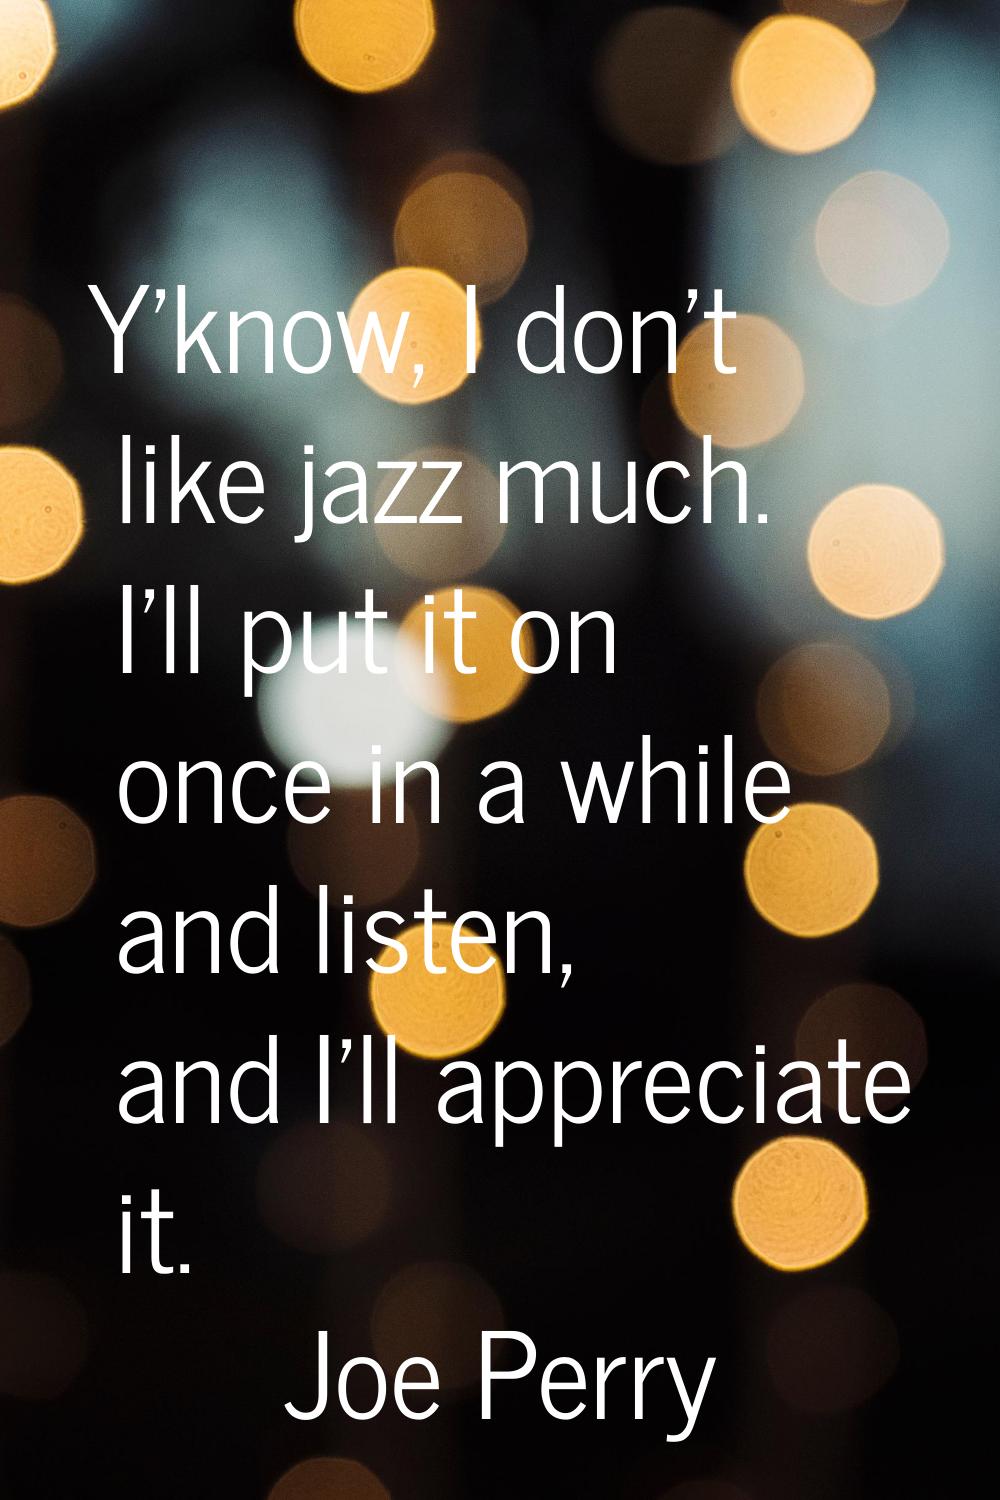 Y'know, I don't like jazz much. I'll put it on once in a while and listen, and I'll appreciate it.